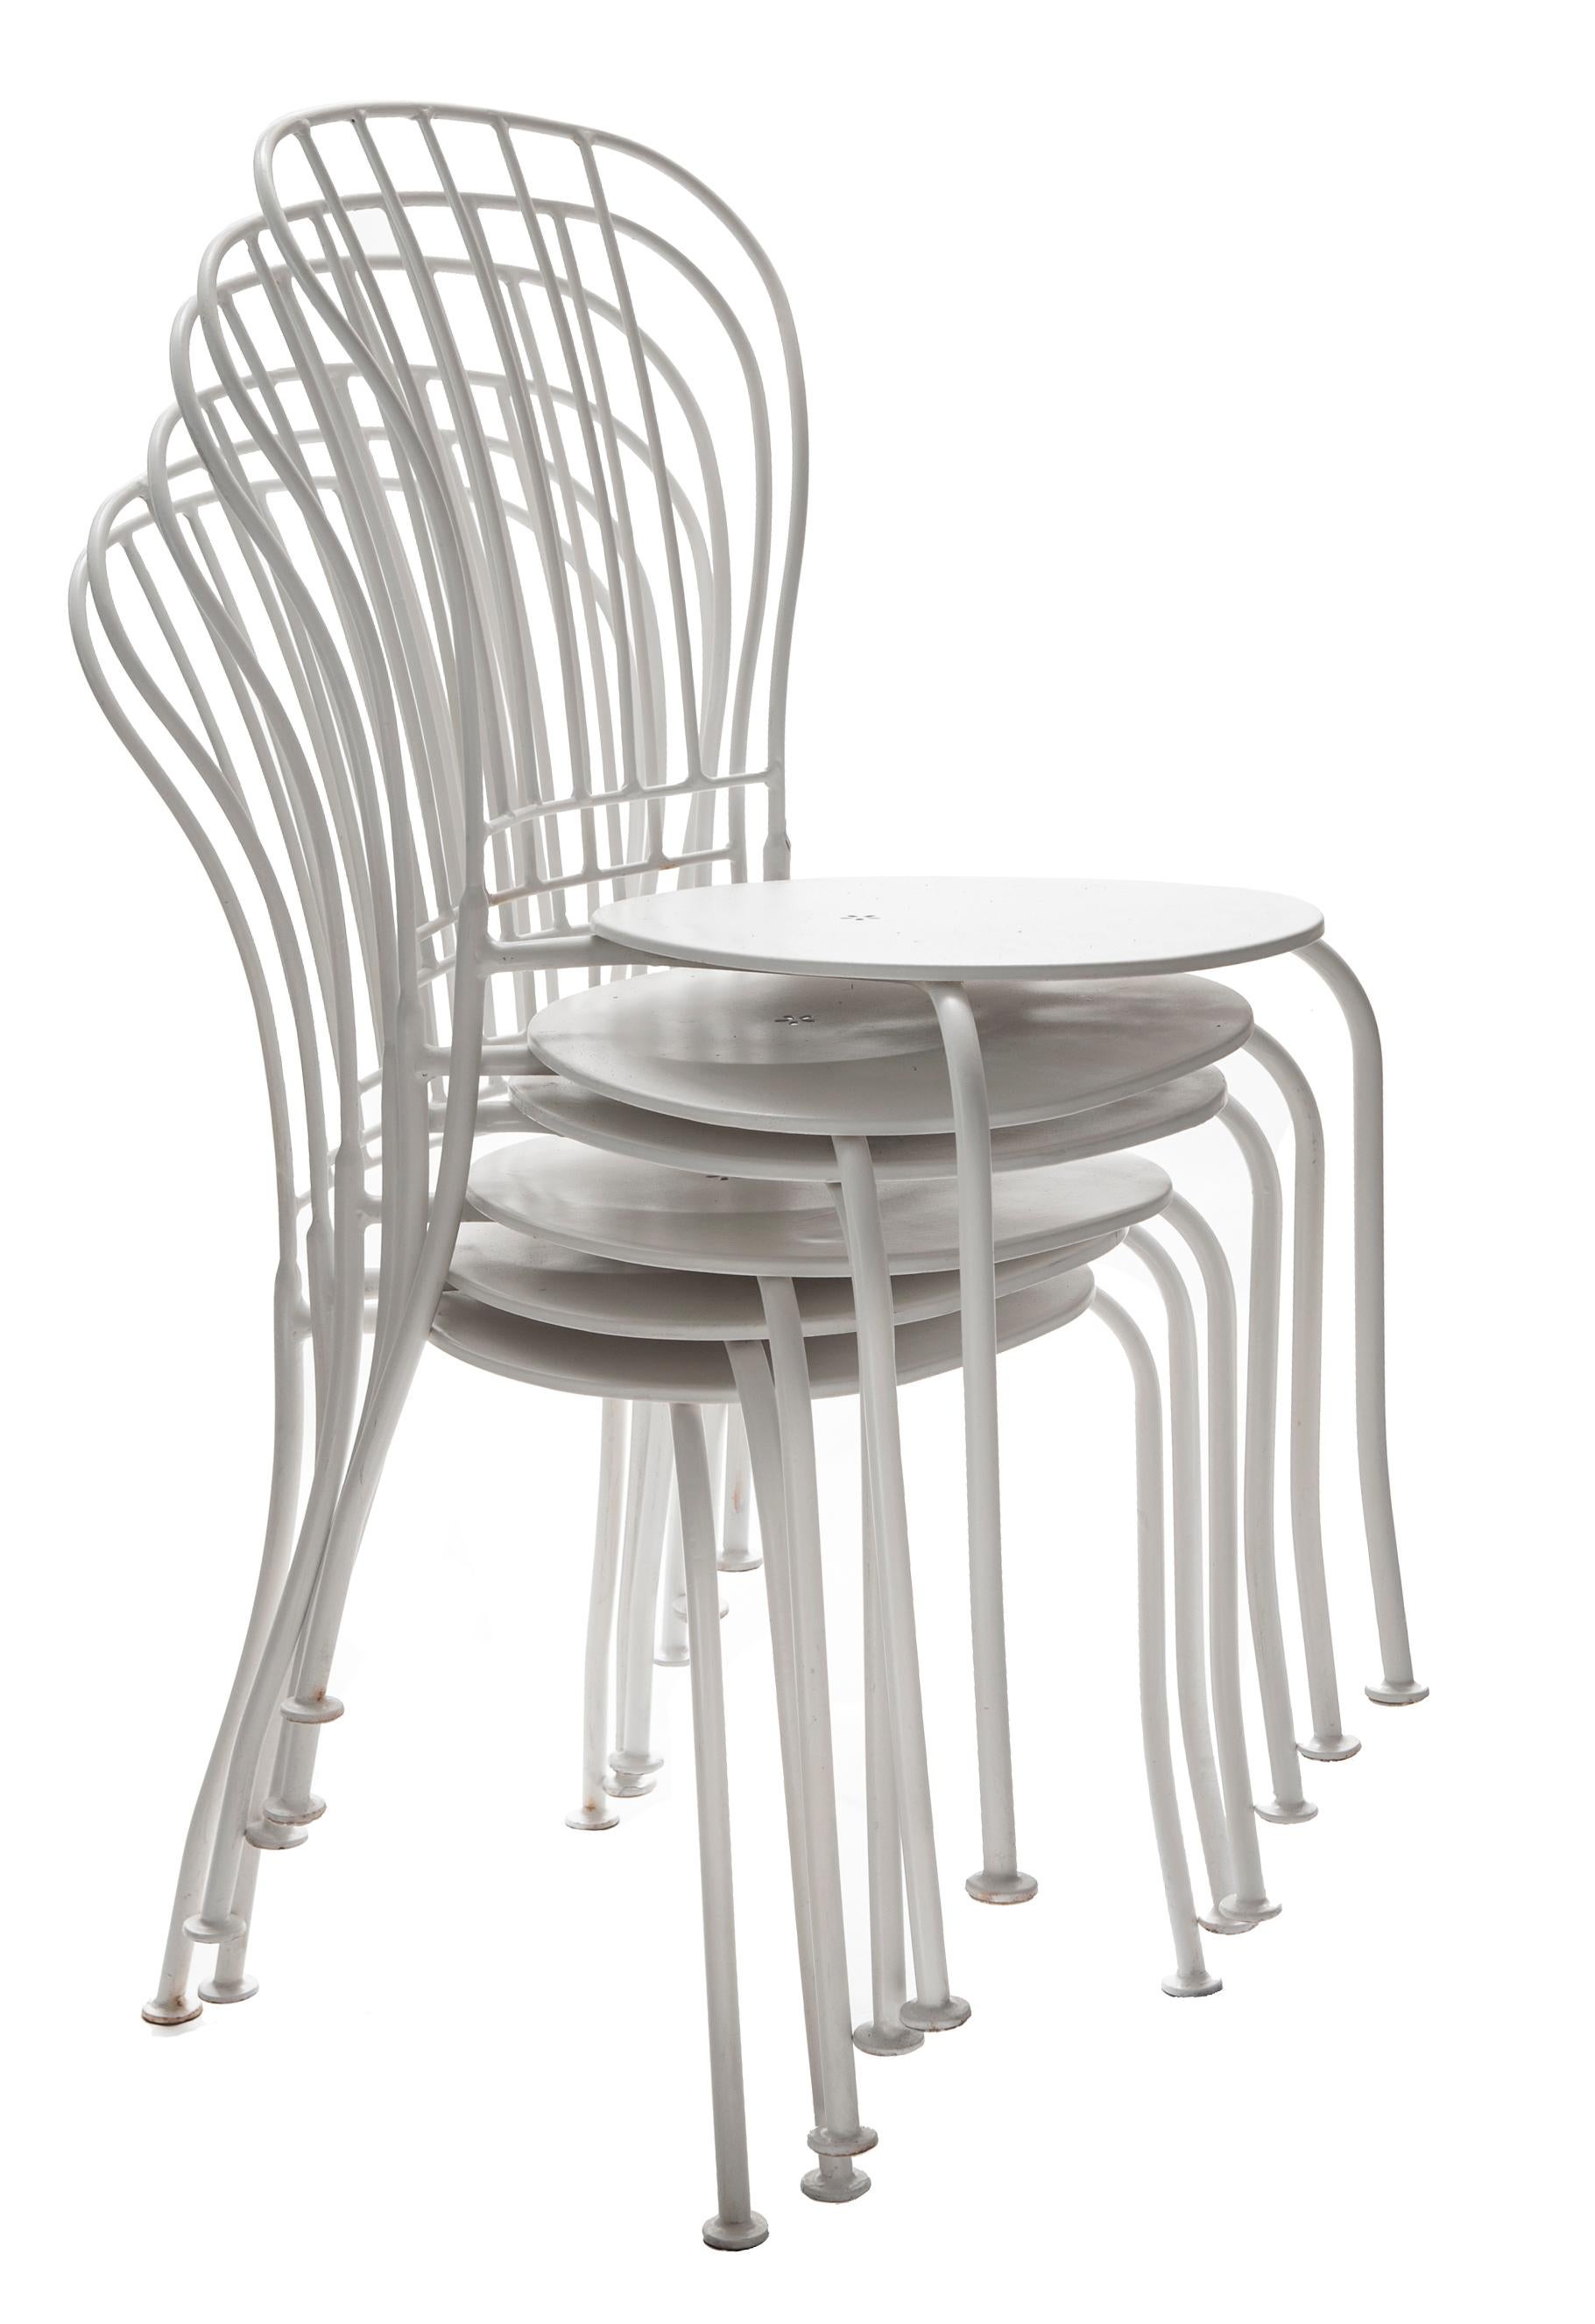 Trendy set of six stackable cafe/bistro chairs. Restored to a smooth satin white finish. The chairs stack for easy storage.